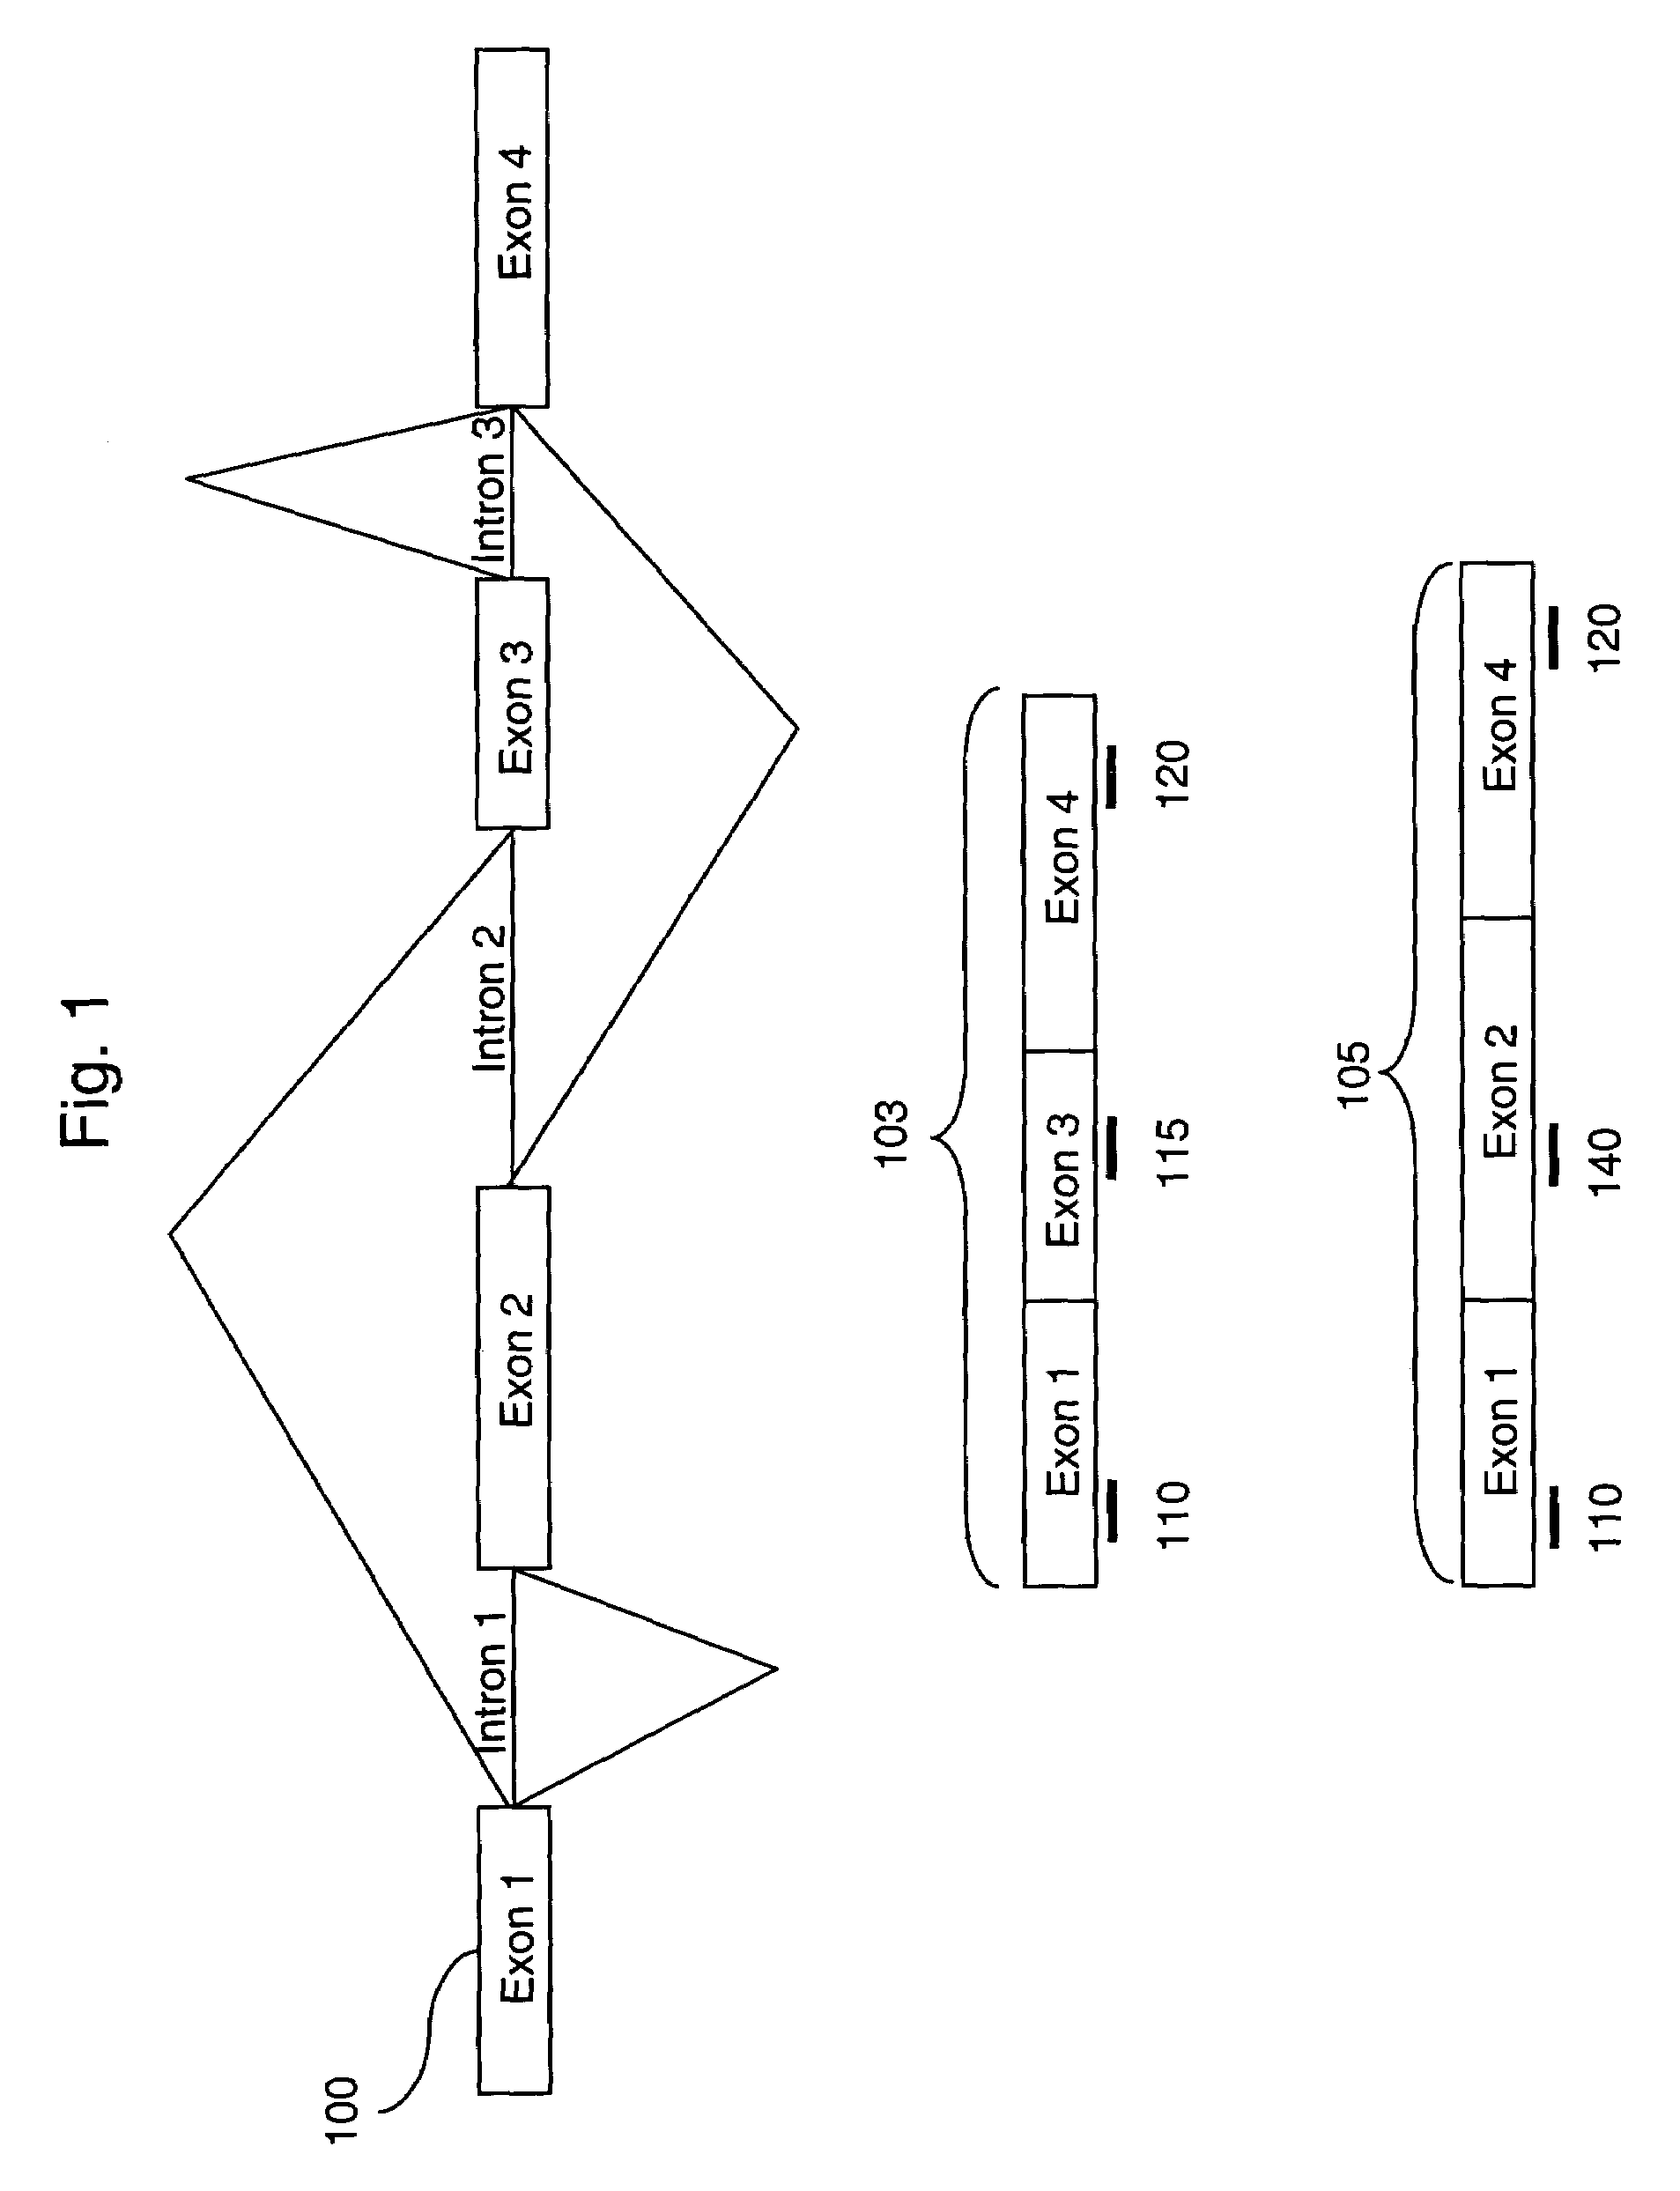 Methods of analysis of alternative splicing in mouse